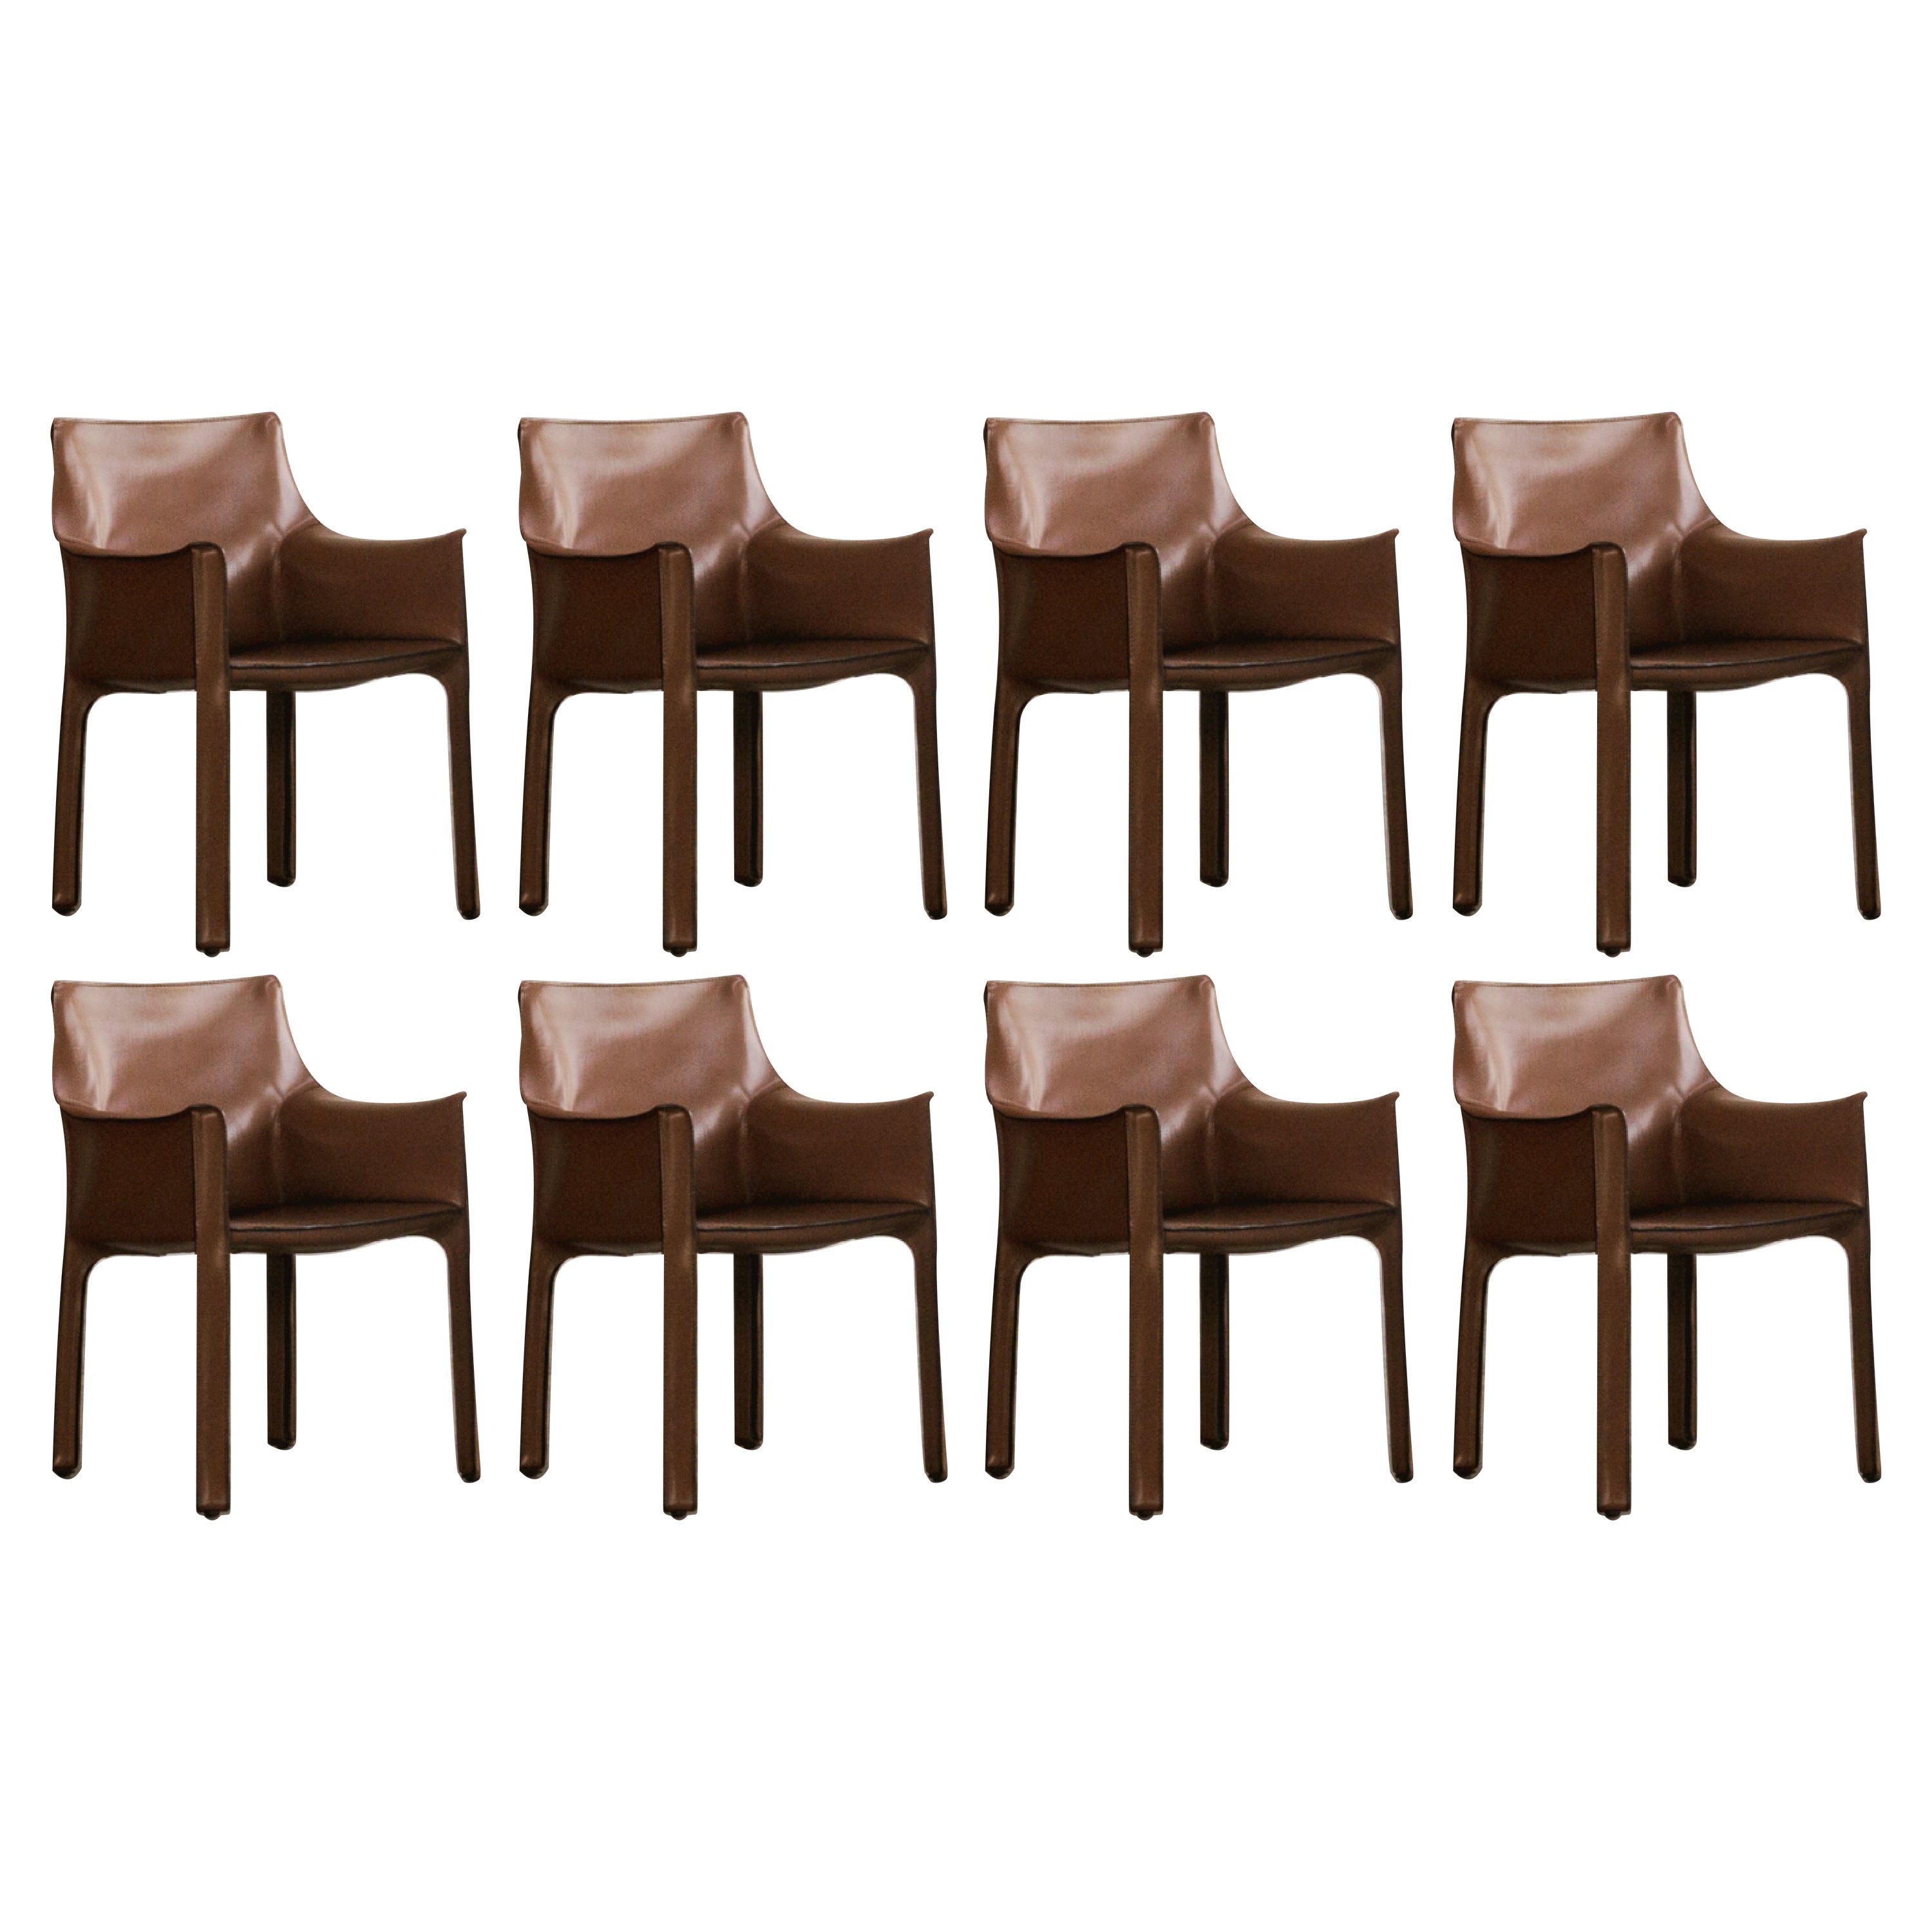 Mario Bellini "CAB 413” Dining Chairs for Cassina, 1977, Set of 8 For Sale